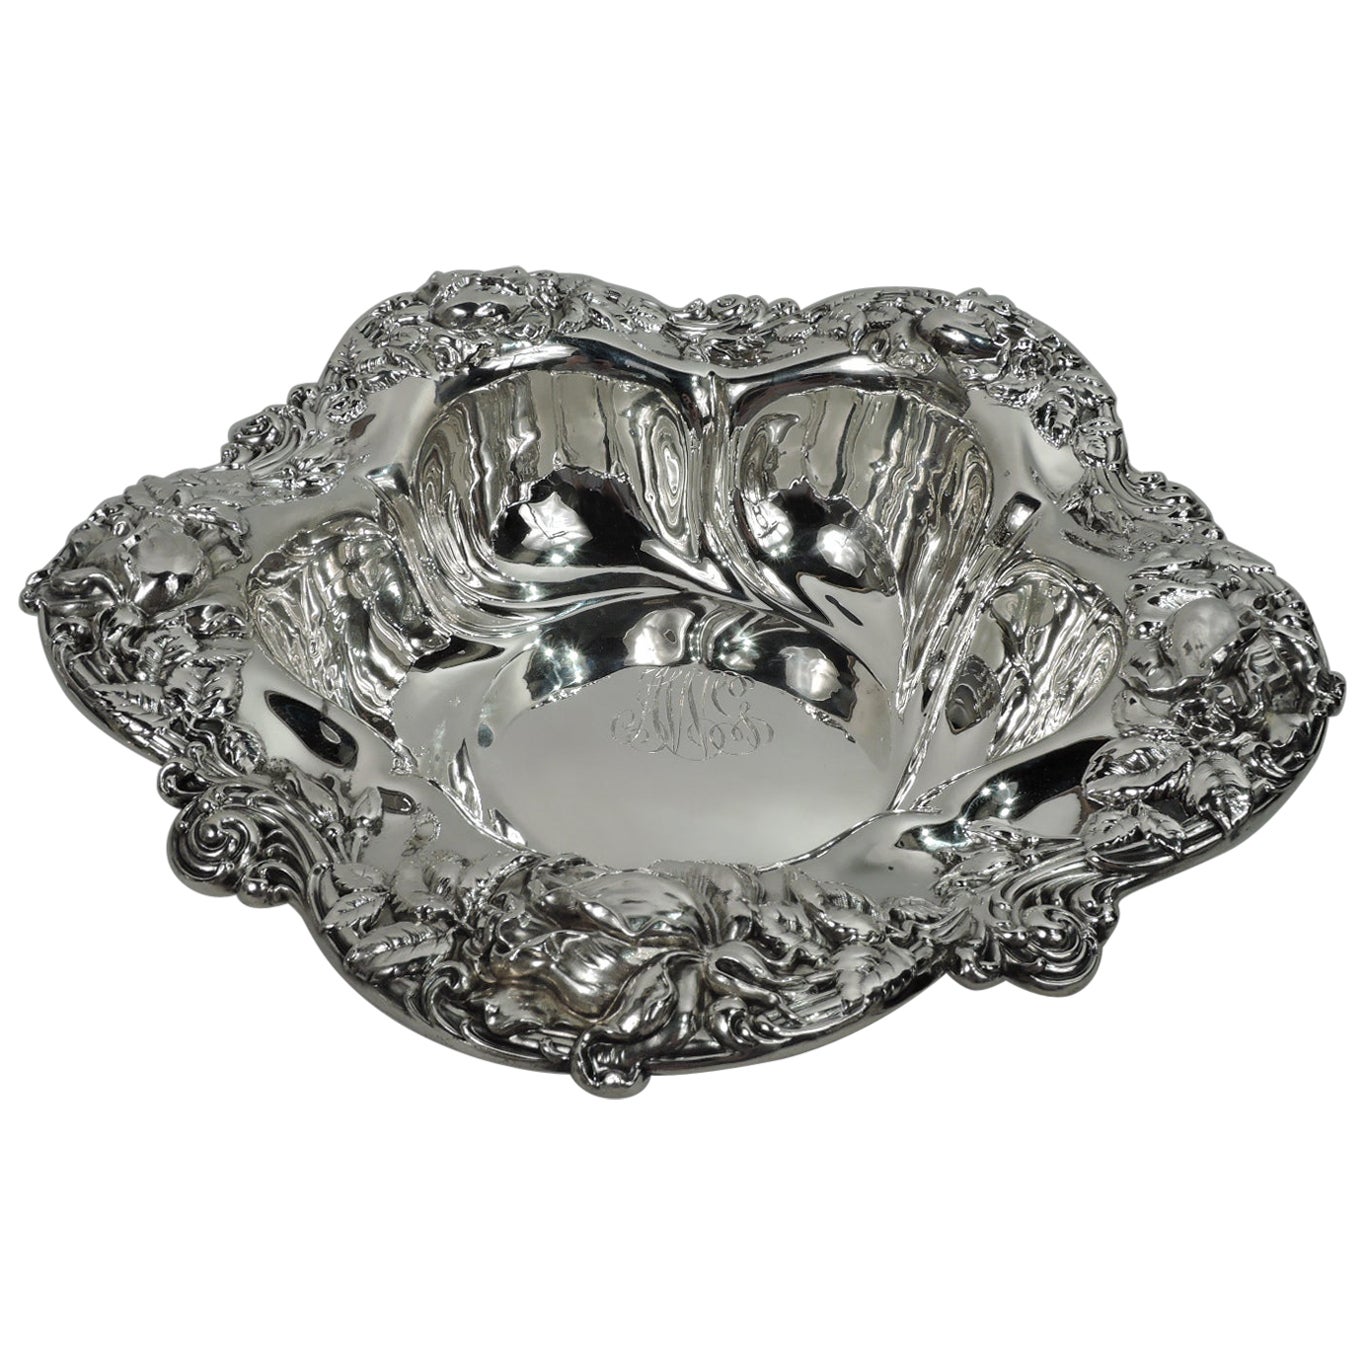 Antique Sterling Silver Art Nouveau Decorative Bowl with Morning Glory ...